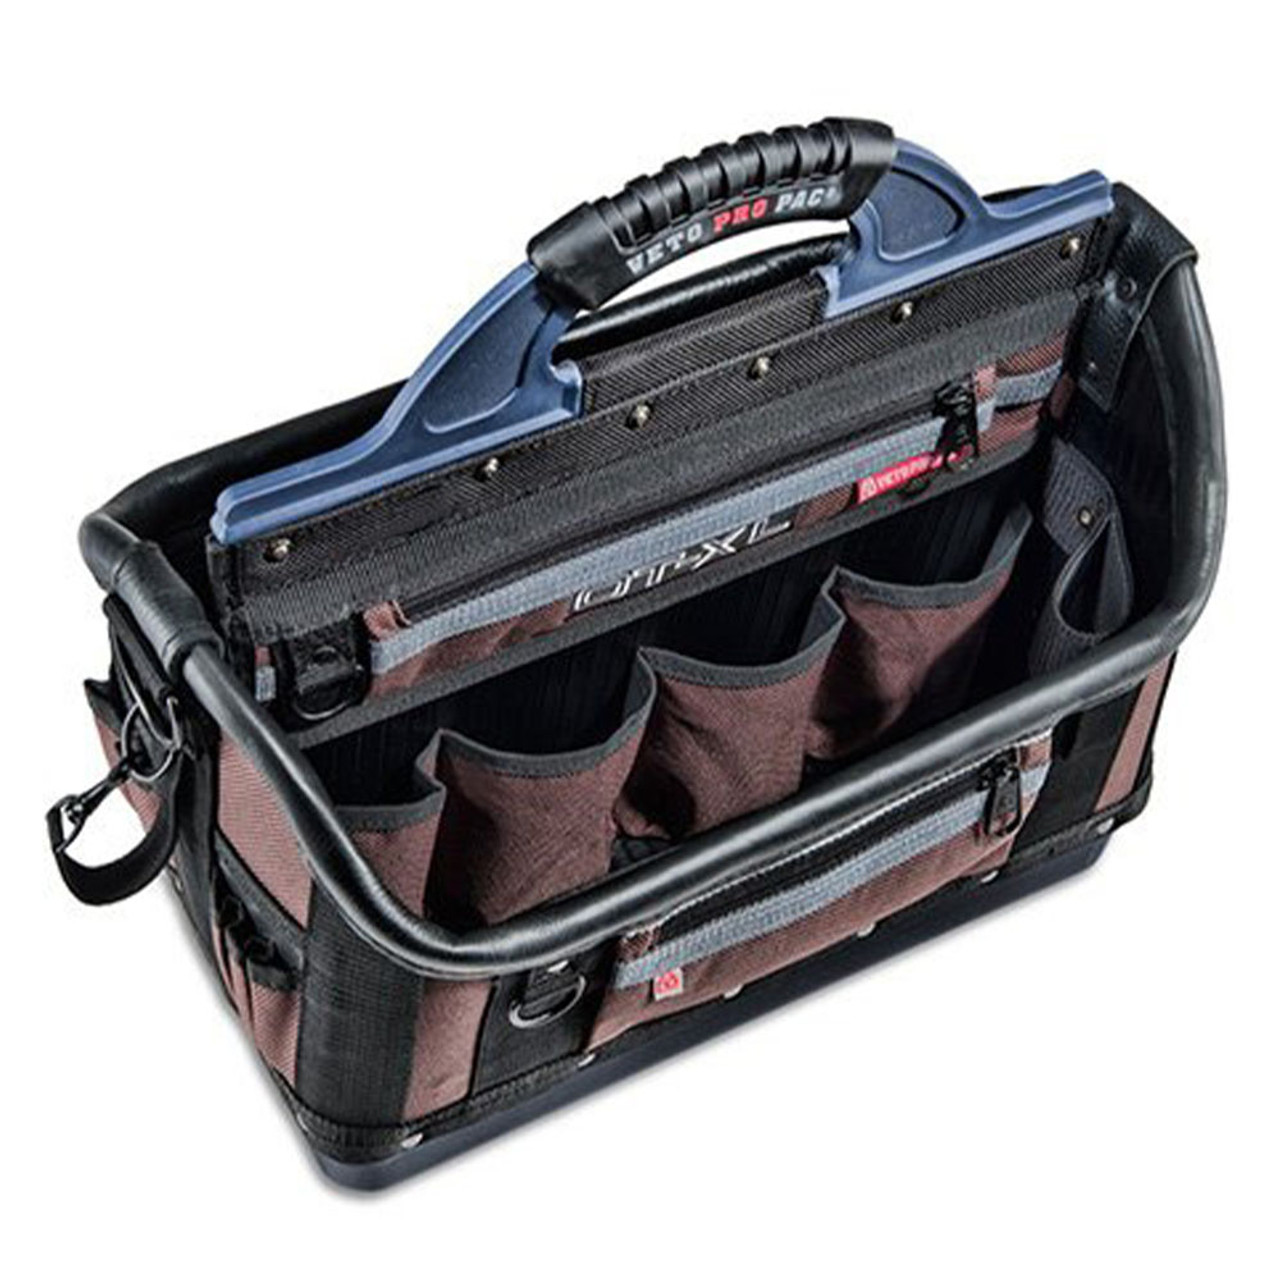 Veto Pro Pac Tool Tote Bag Open Top Large MB-OT-LC from Veto Pro